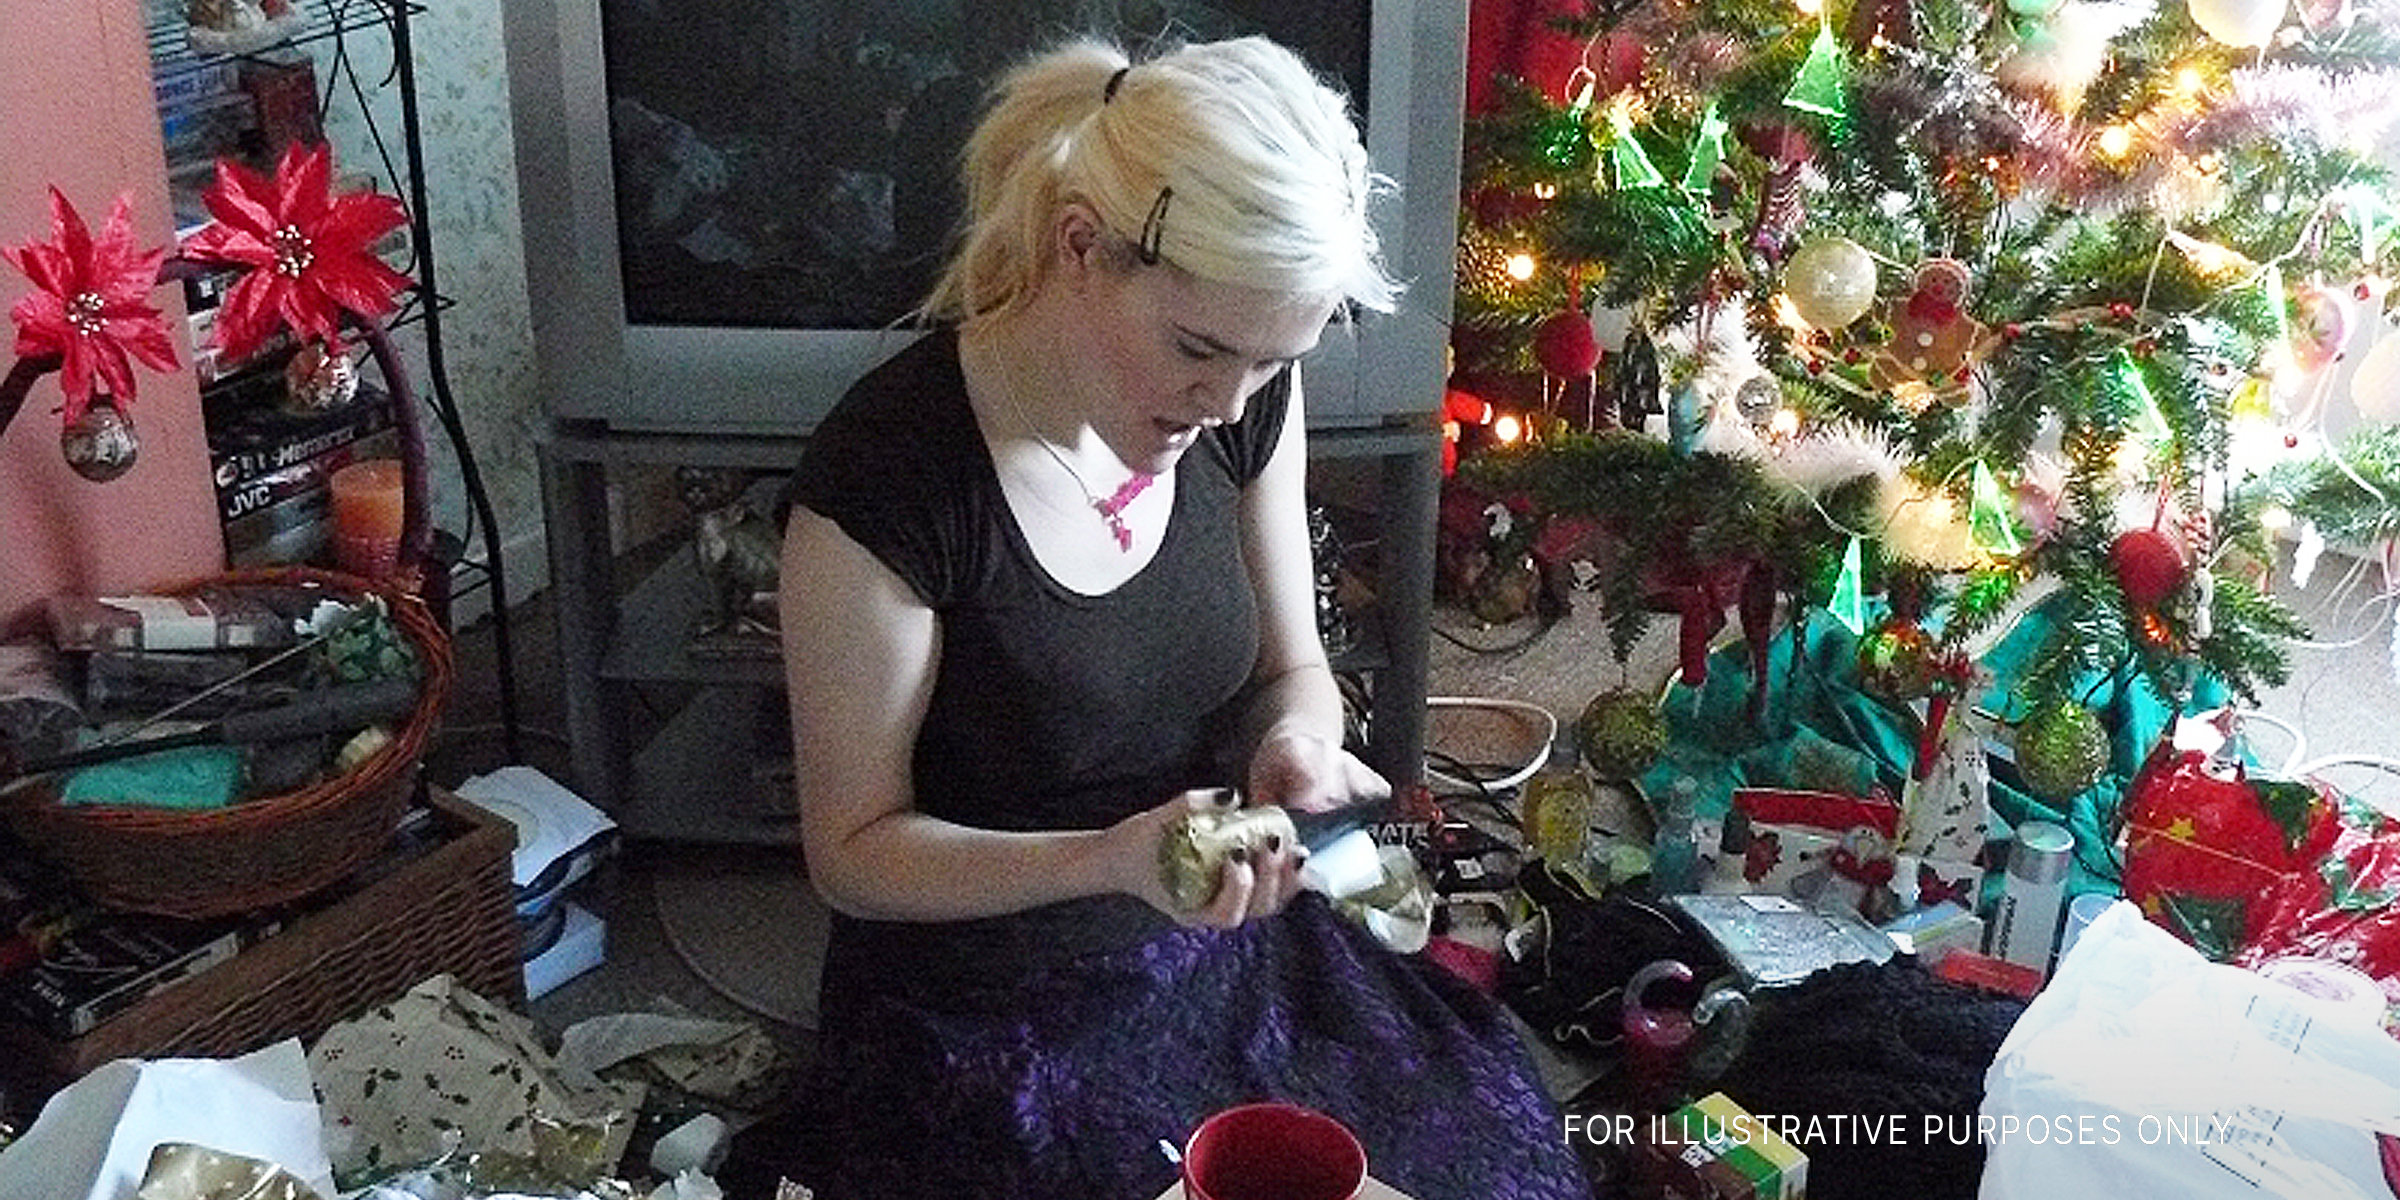 A young woman unwraps a Christmas present | Source: flickr.com/flem007_uk/CC BY-ND 2.0